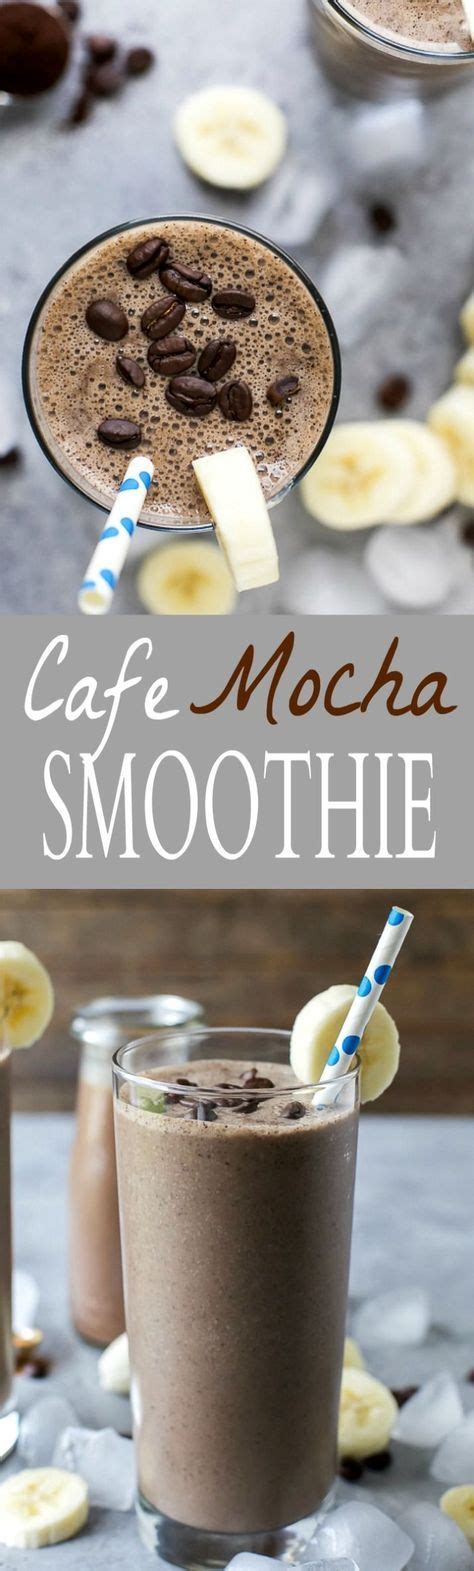 Gaining weight in a healthy and safe manner is a lot different than weight gain due to inactivity and overeating. Cafe Mocha Smoothie | Recipe | Mocha smoothie, Yummy ...